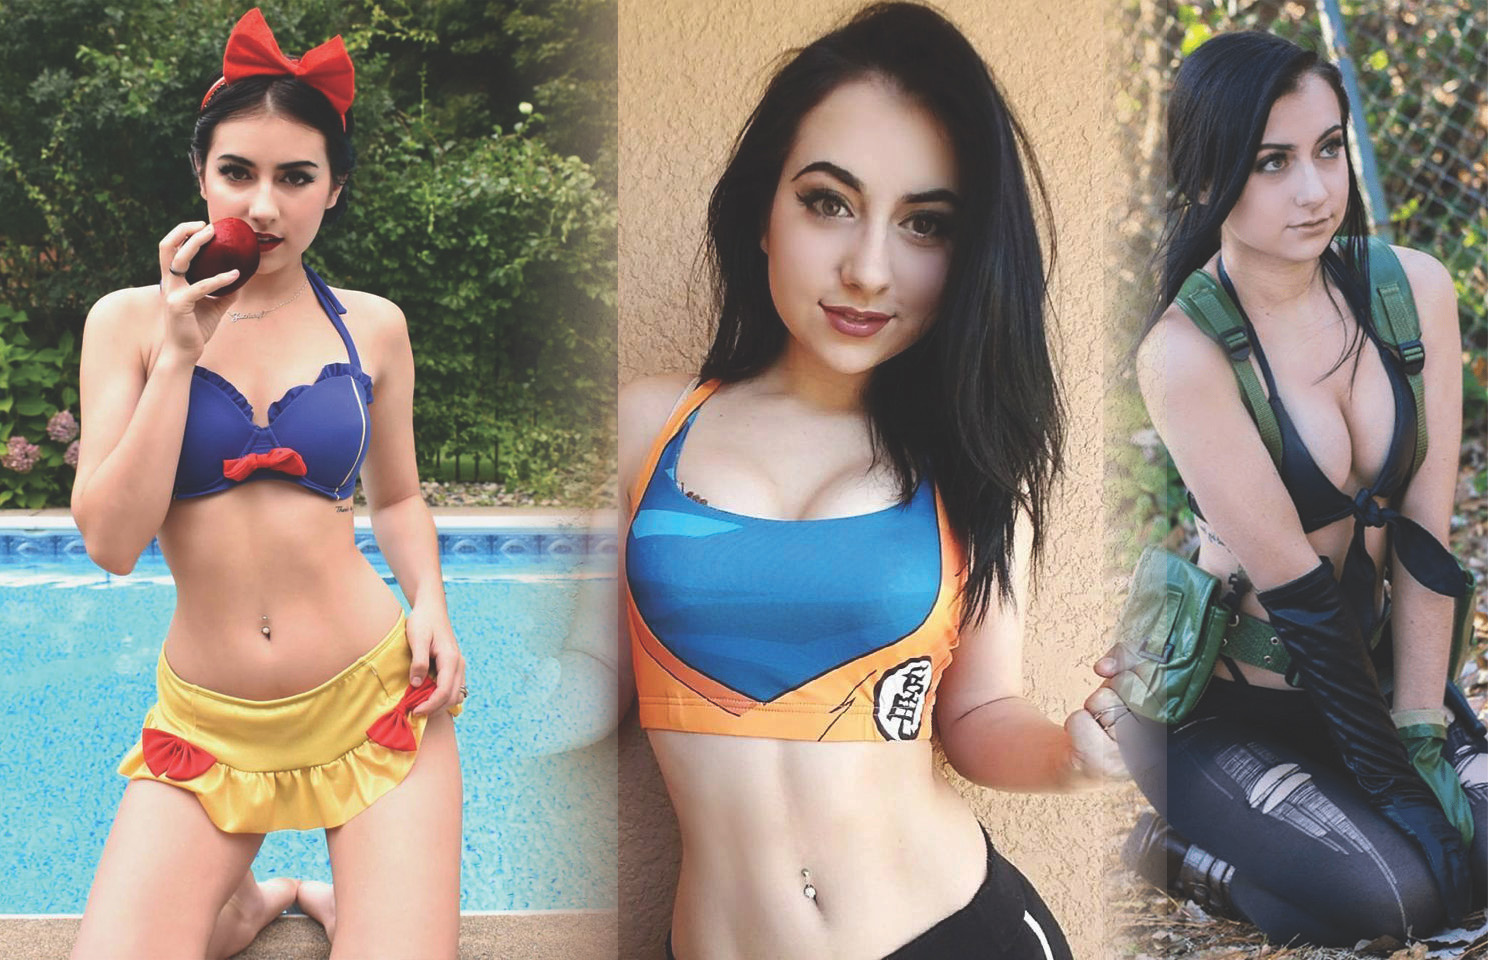 Interview with cosplayer, model and part-time princess Karrigan Taylor